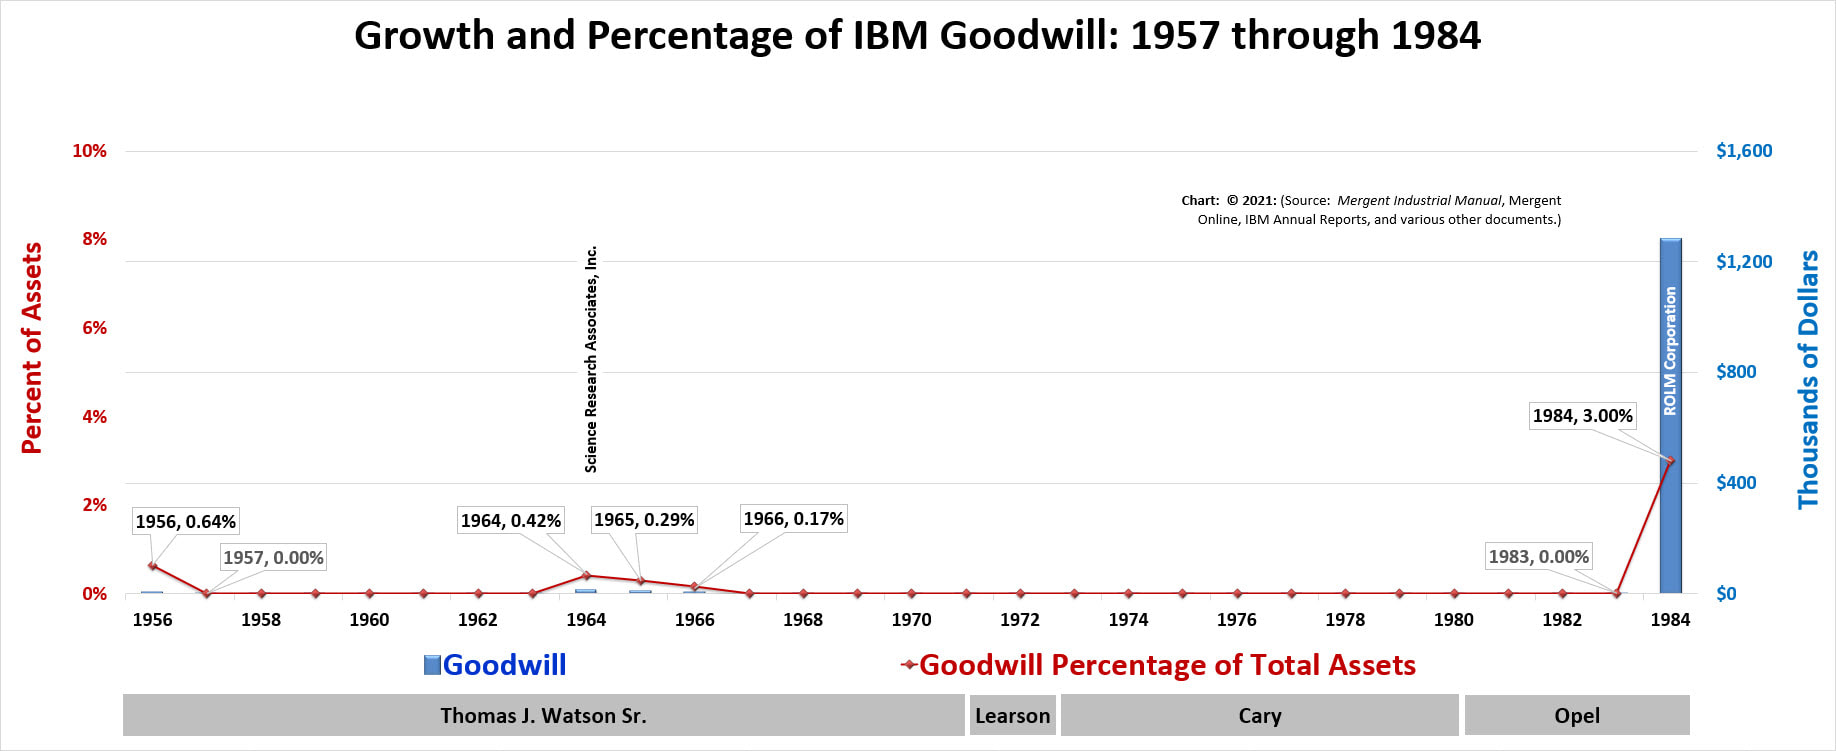 A color bar chart showing Goodwill and Goodwill as a Percentage of Total Assets from 1956 to 1984 for Thomas J. Watson Sr., T. Vincent (Vin) Learson, Frank T. Cary and John R. Opel.